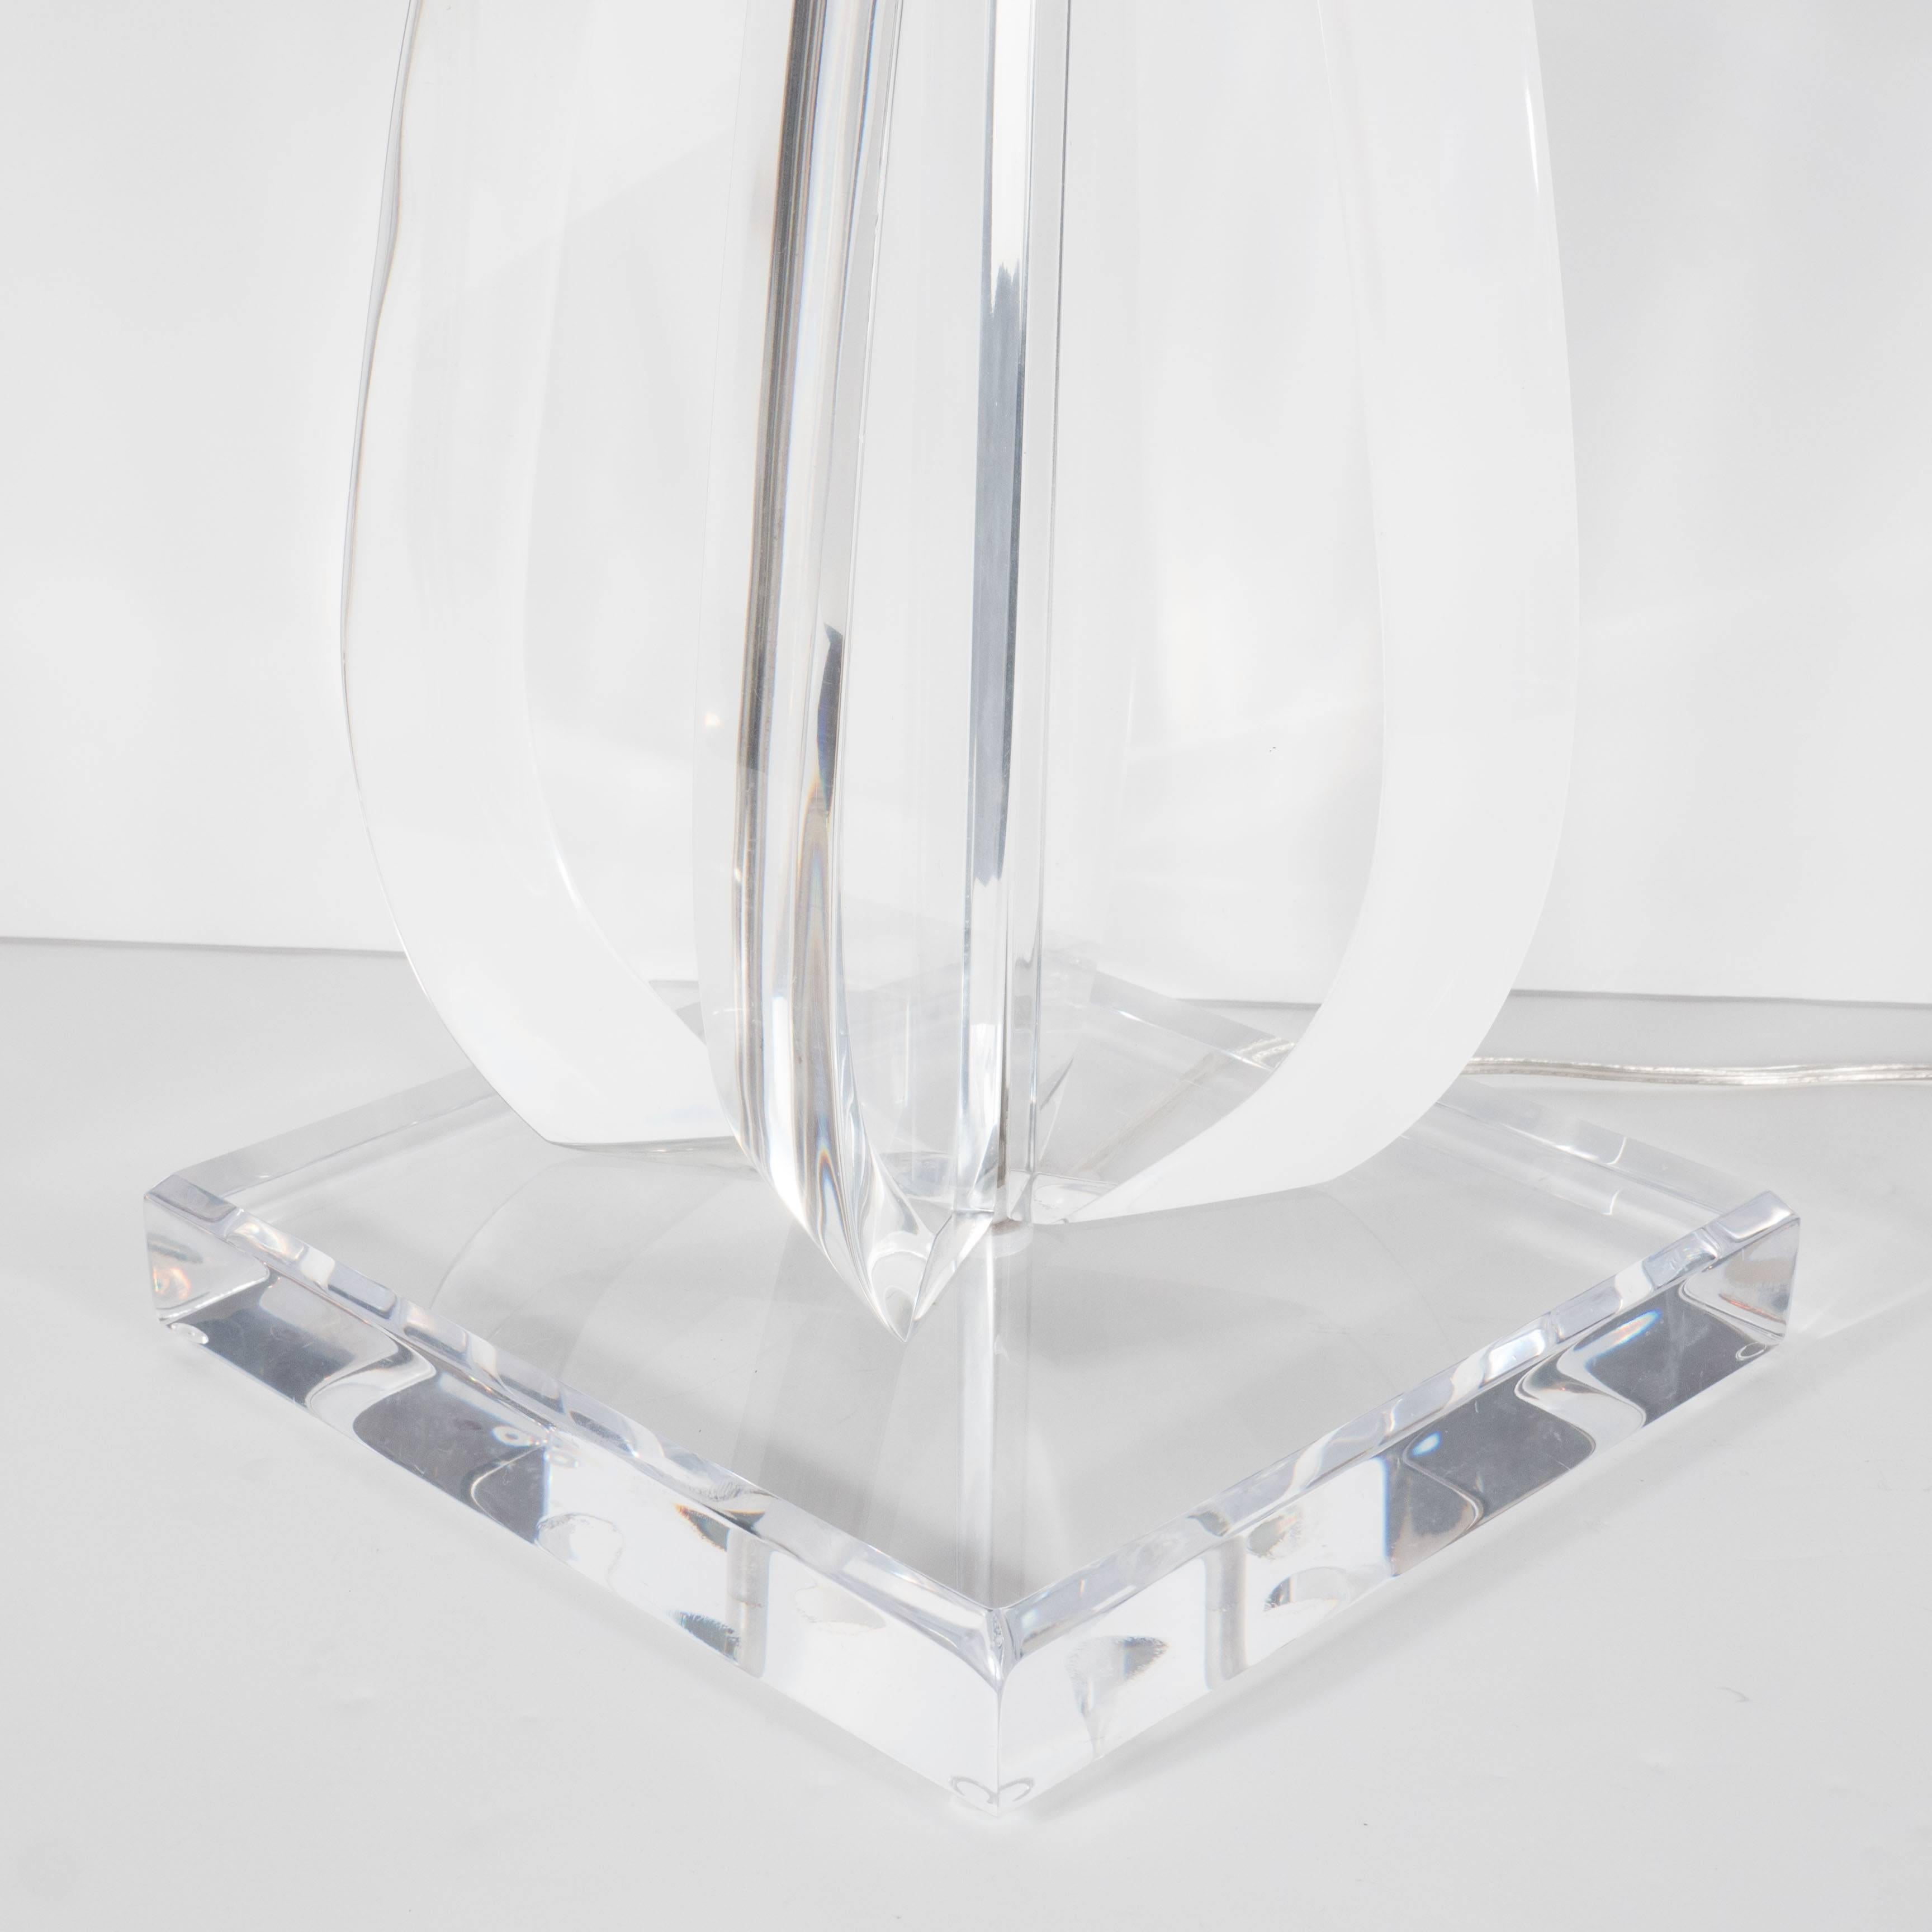 American Mid-Century Modernist Lucite Table Lamp with Chrome Fittings For Sale